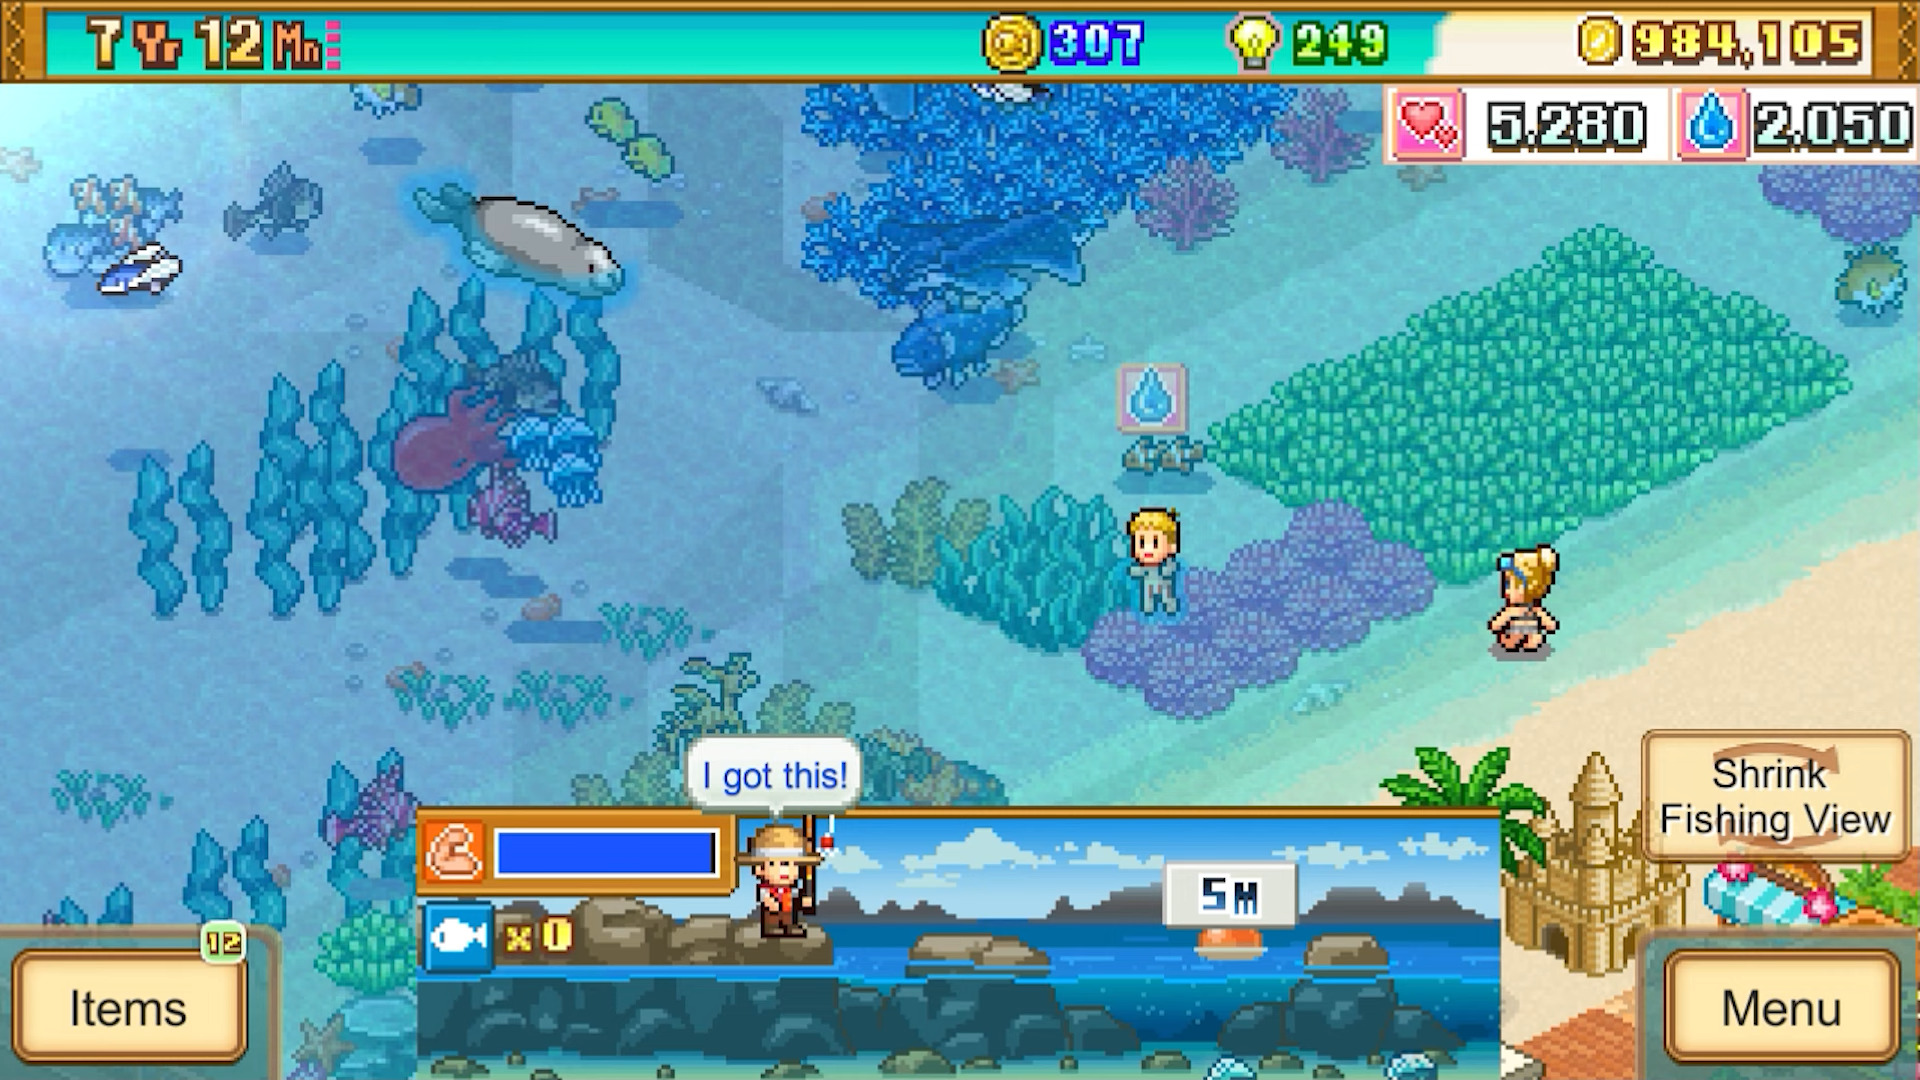 Tropical Resort Story - Android game screenshots.